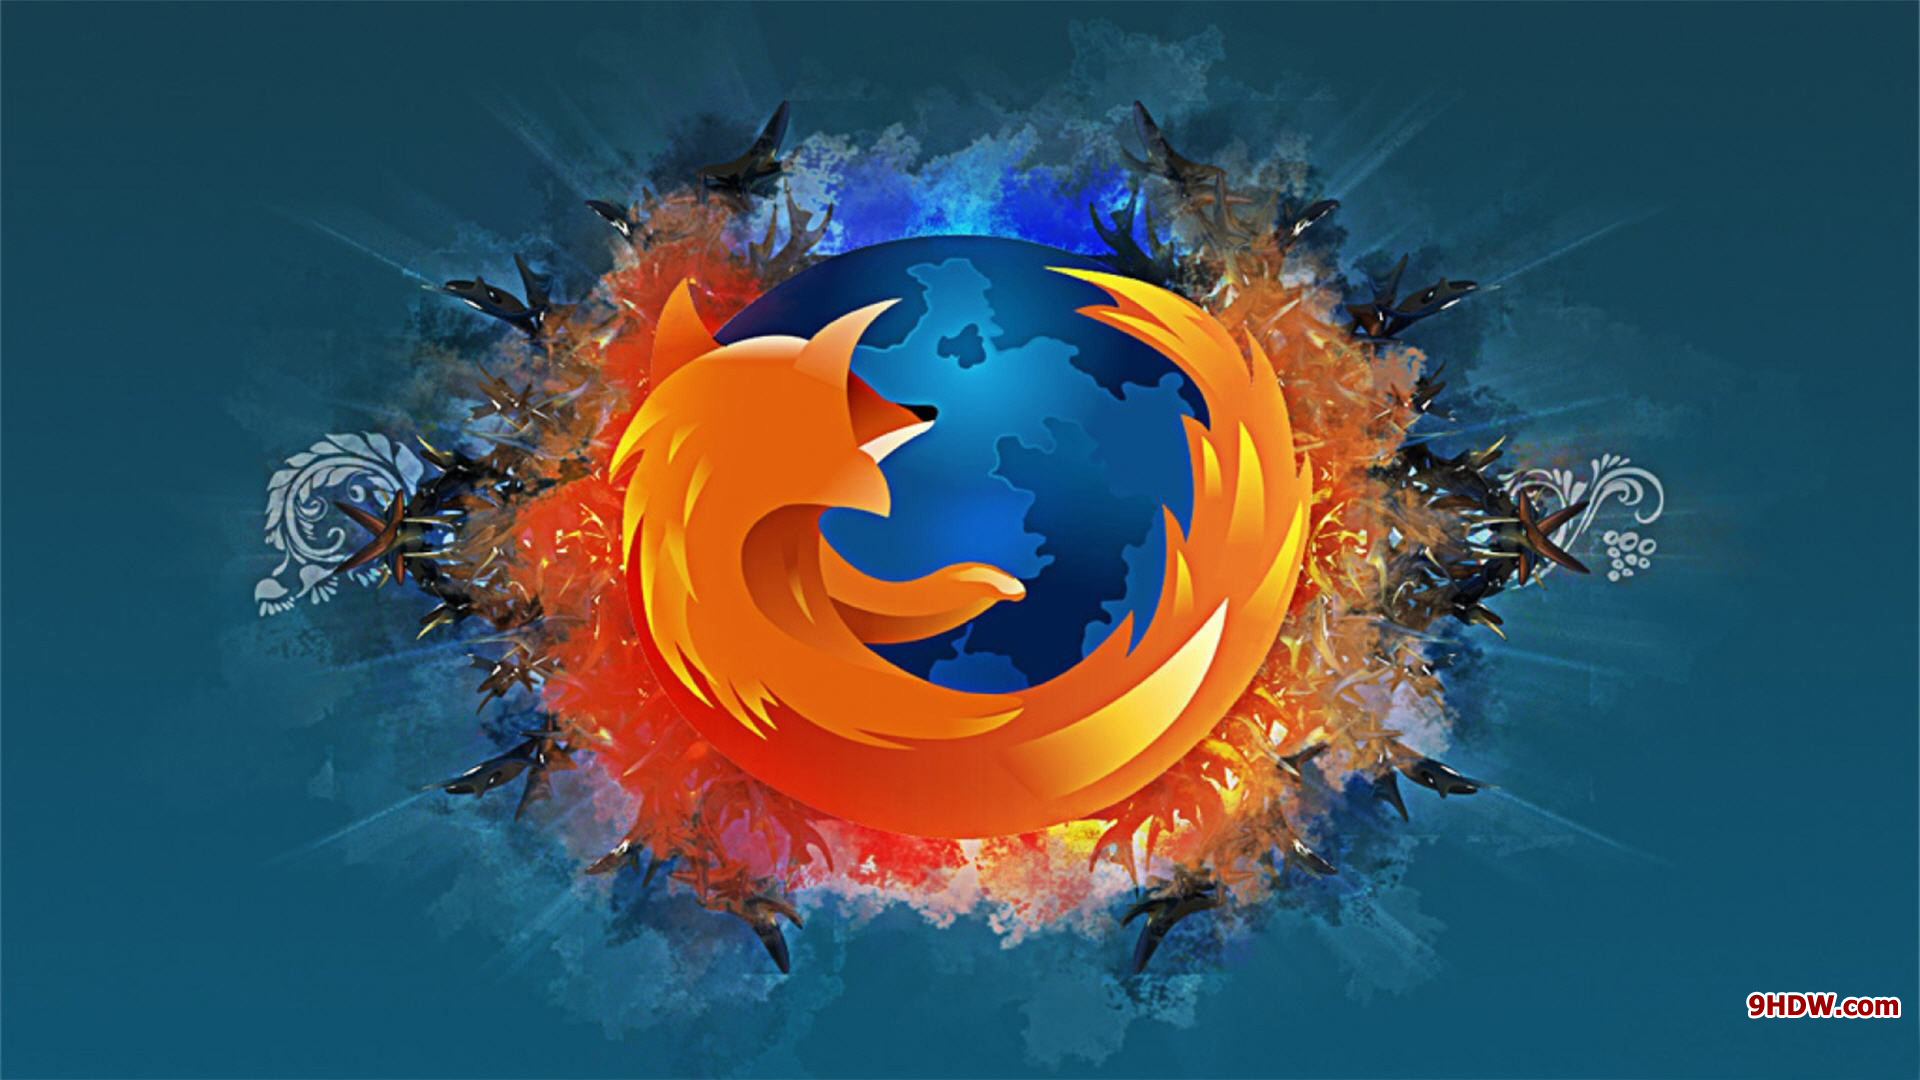 Free Download Hq Mozilla Firefox Wallpaper Hd 19x1080 17 19x1080 For Your Desktop Mobile Tablet Explore 48 Firefox Wallpaper 19x1080 Star Wars Wallpaper 19x1080 Nature Wallpaper 19x1080 Space Wallpaper 19x1080